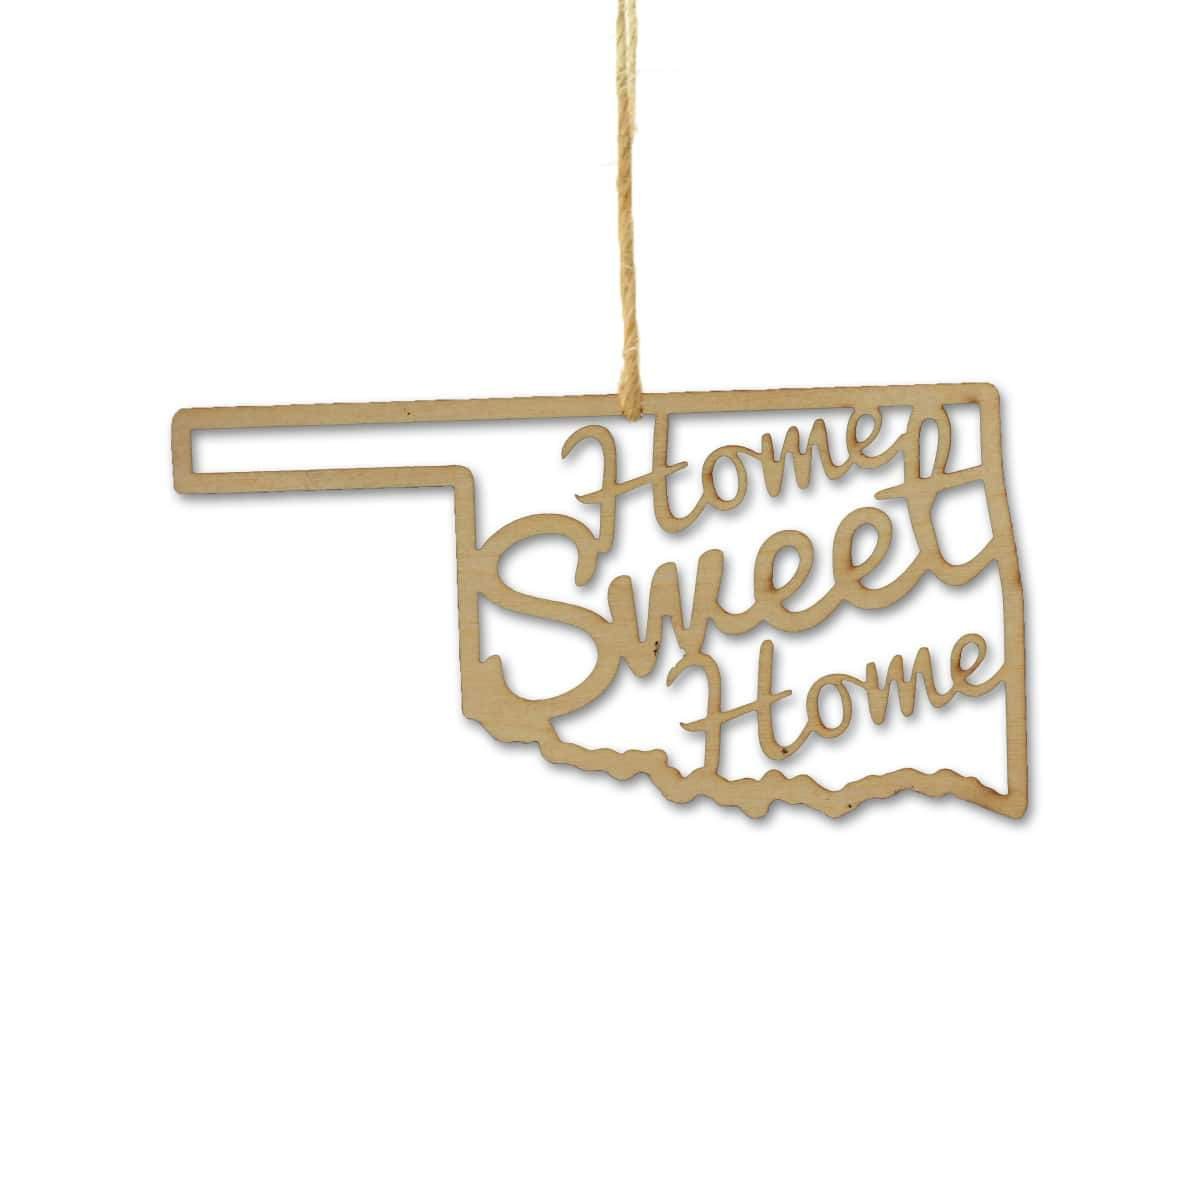 Torched Products Ornaments Oklahoma Home Sweet Home Ornaments (781220937845)